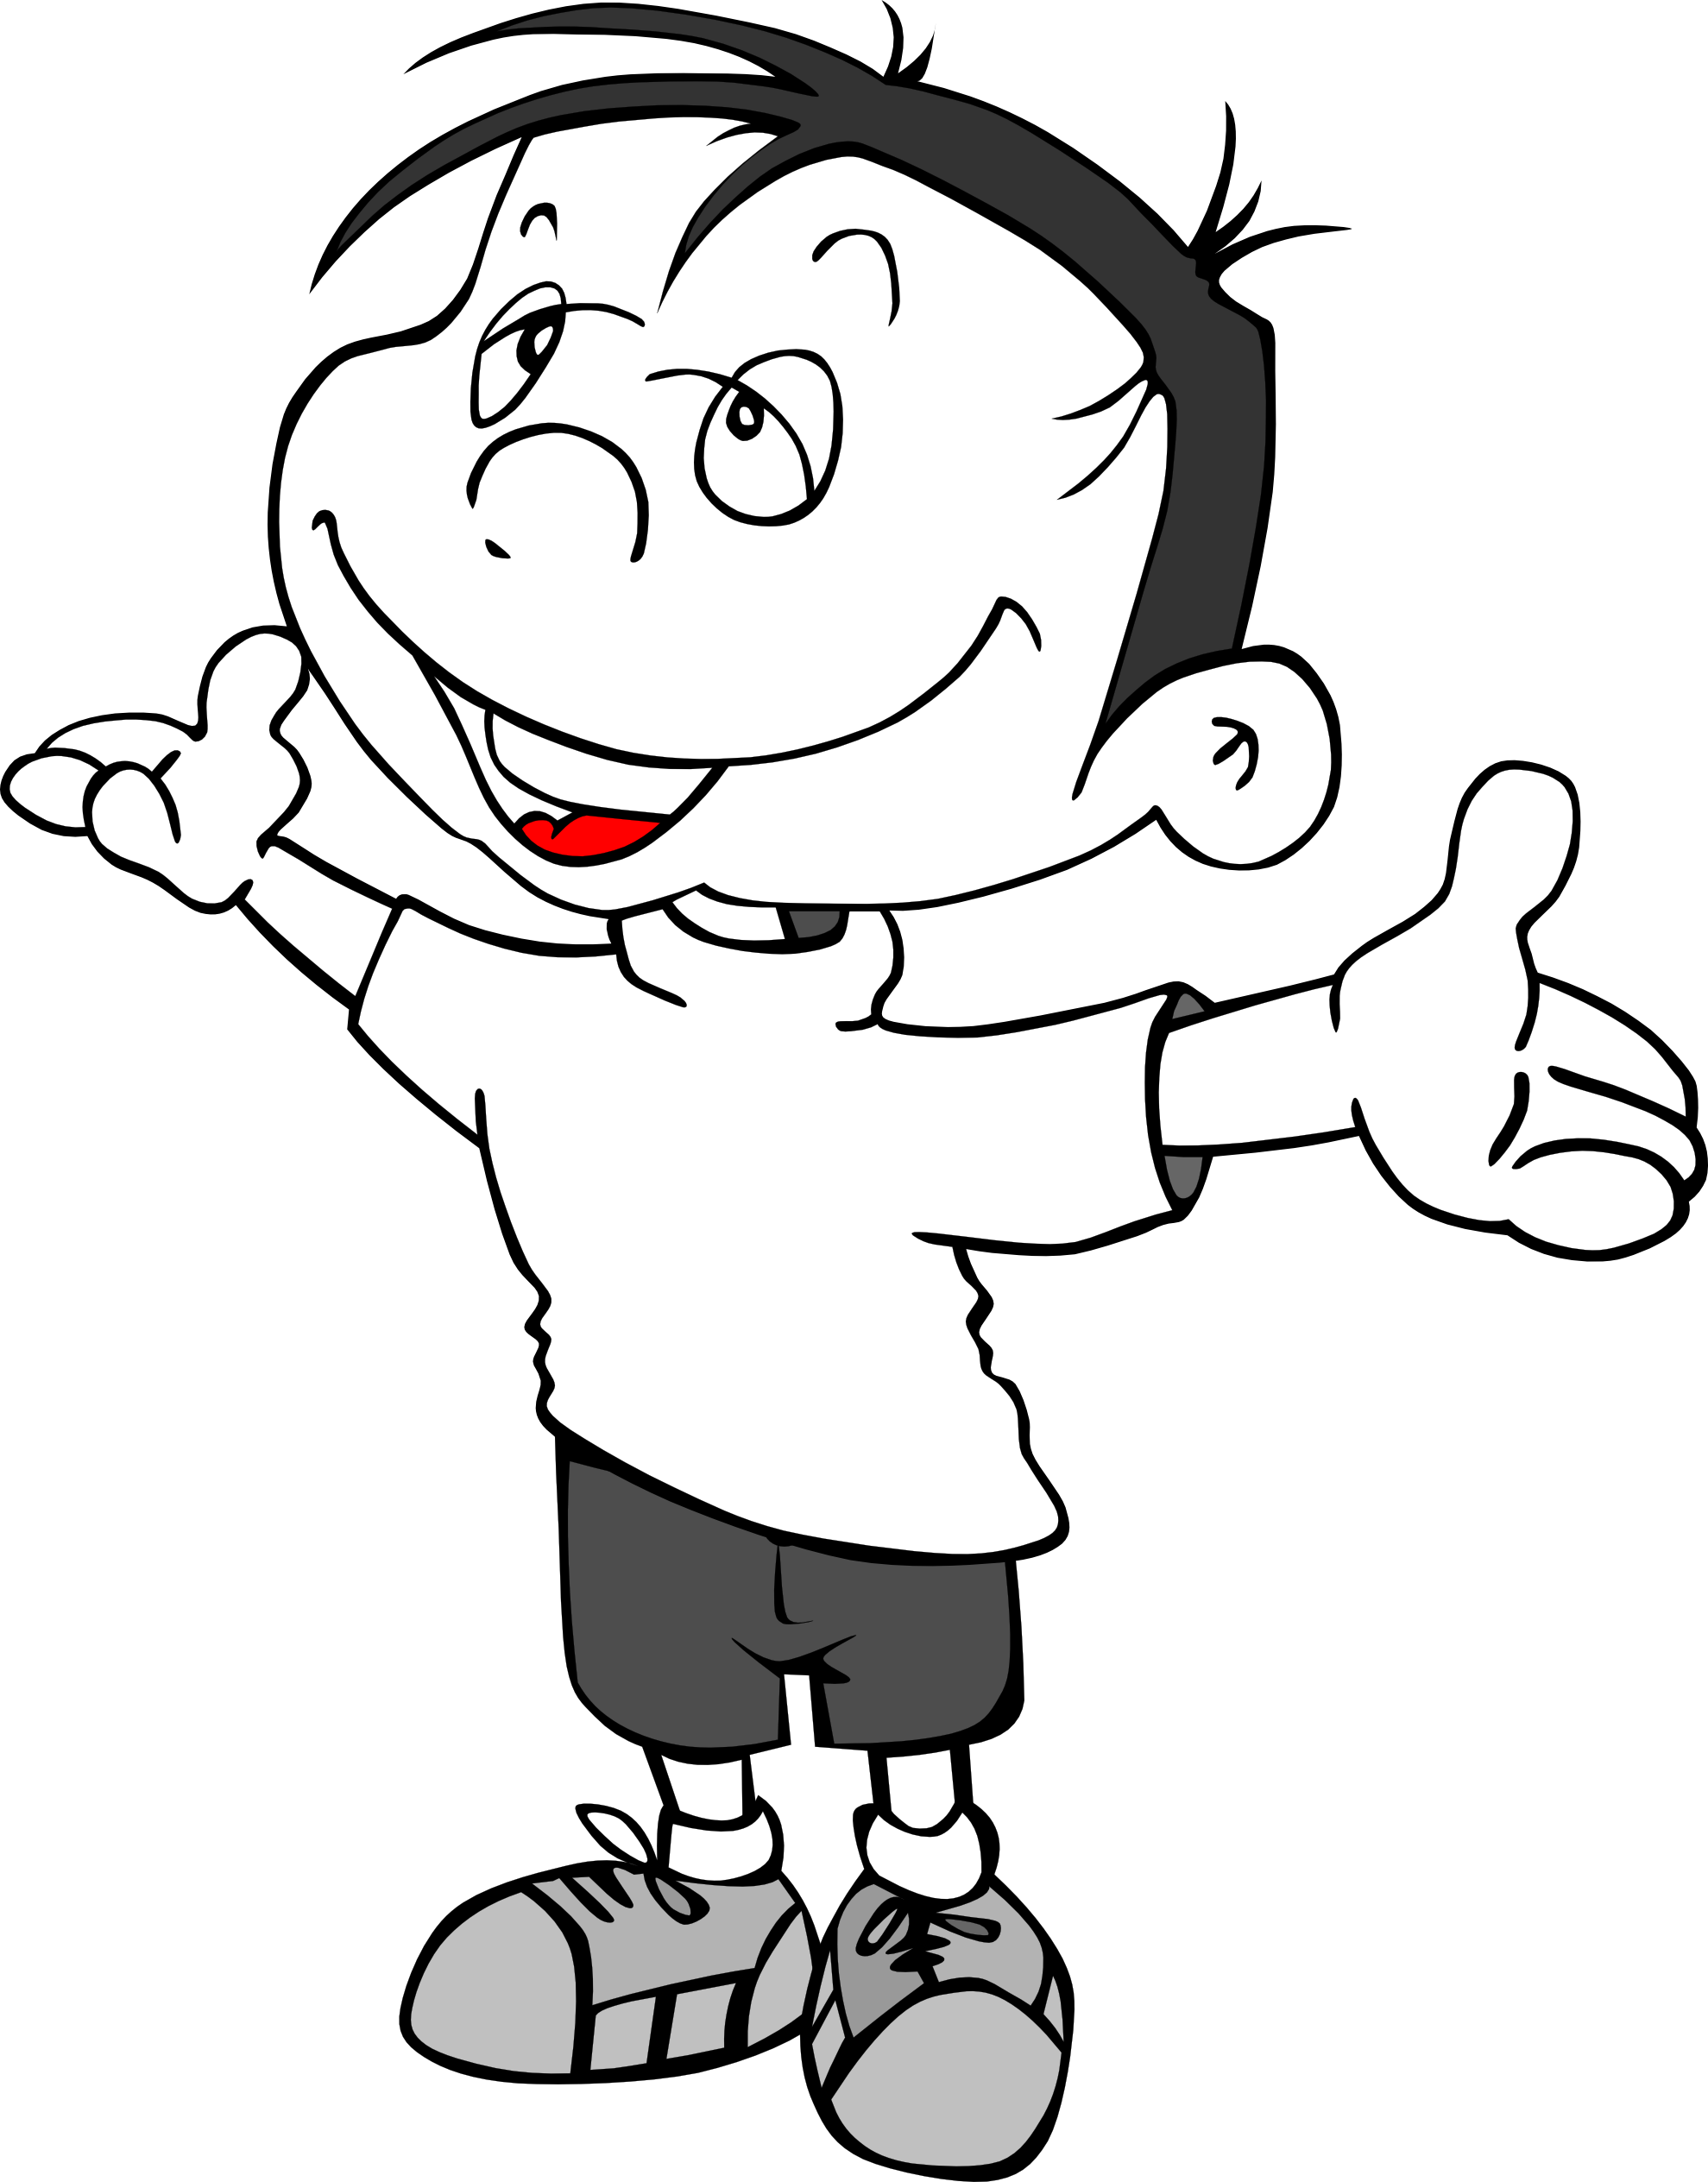 boy black white line art coloring book colouring hunky dory SVG 